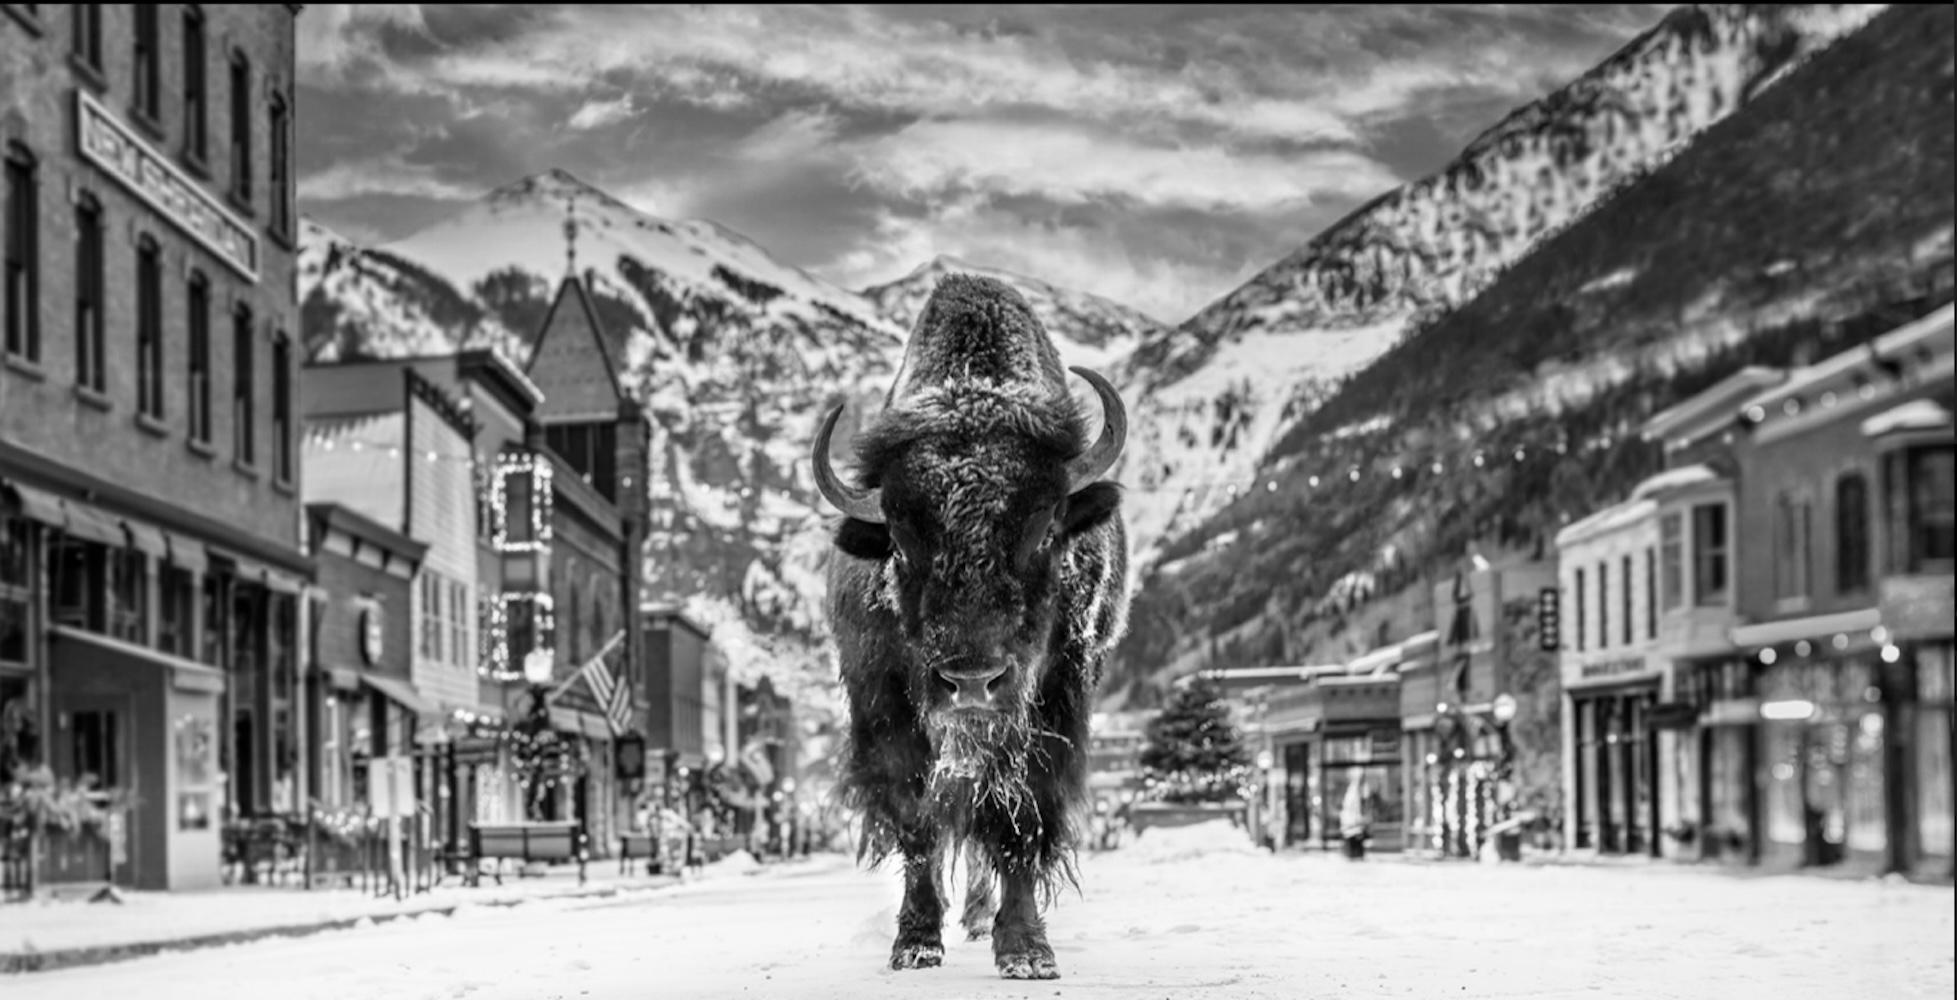 The Bison on Main - Photograph by David Yarrow